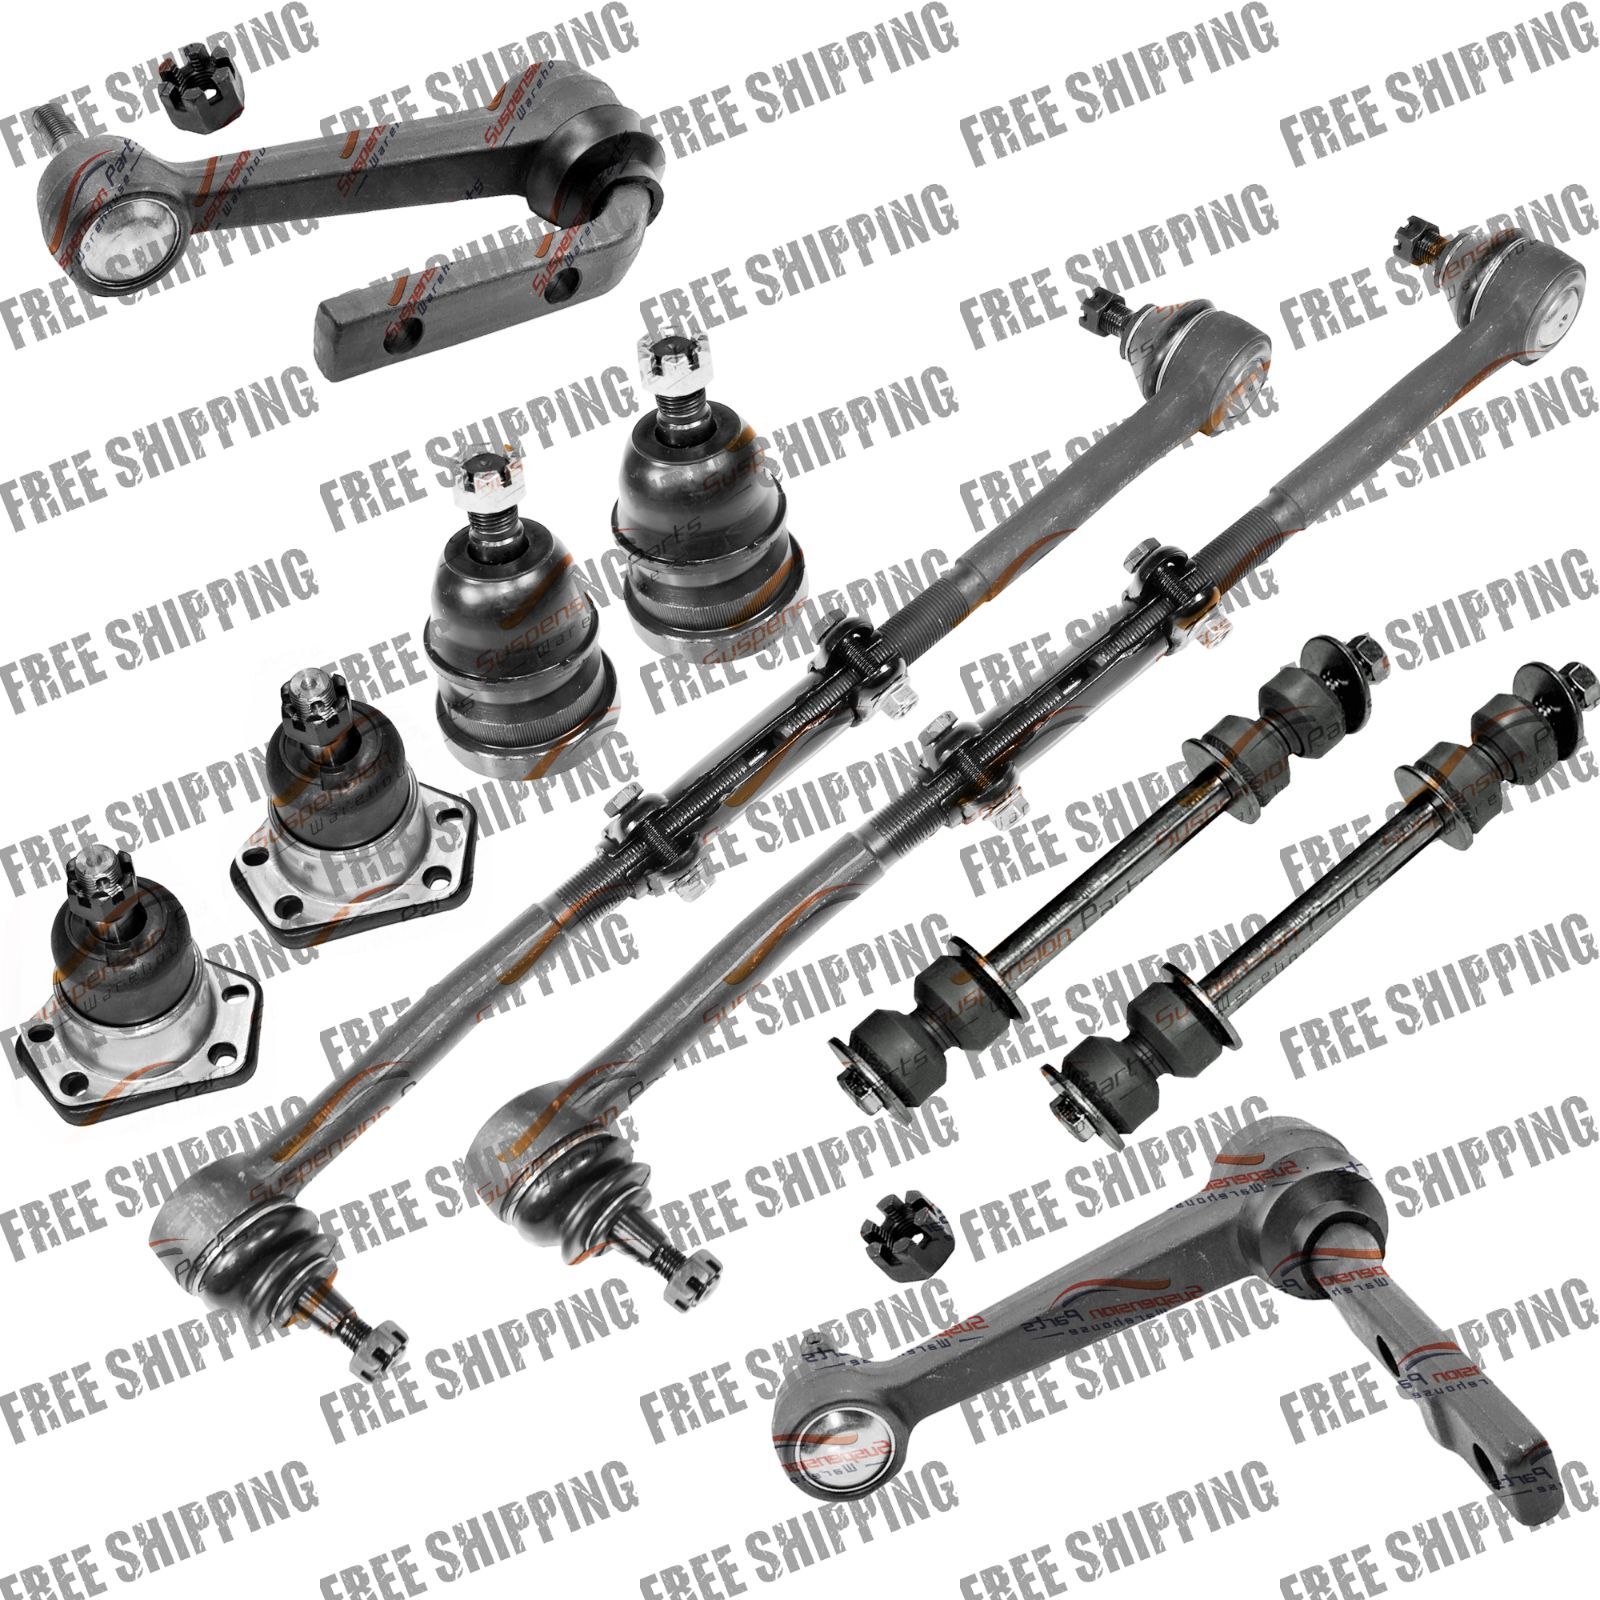 New Steering Kit Tie Rod Ends Ball Joints Sway Bar Link For RWD Chevy Astro Van